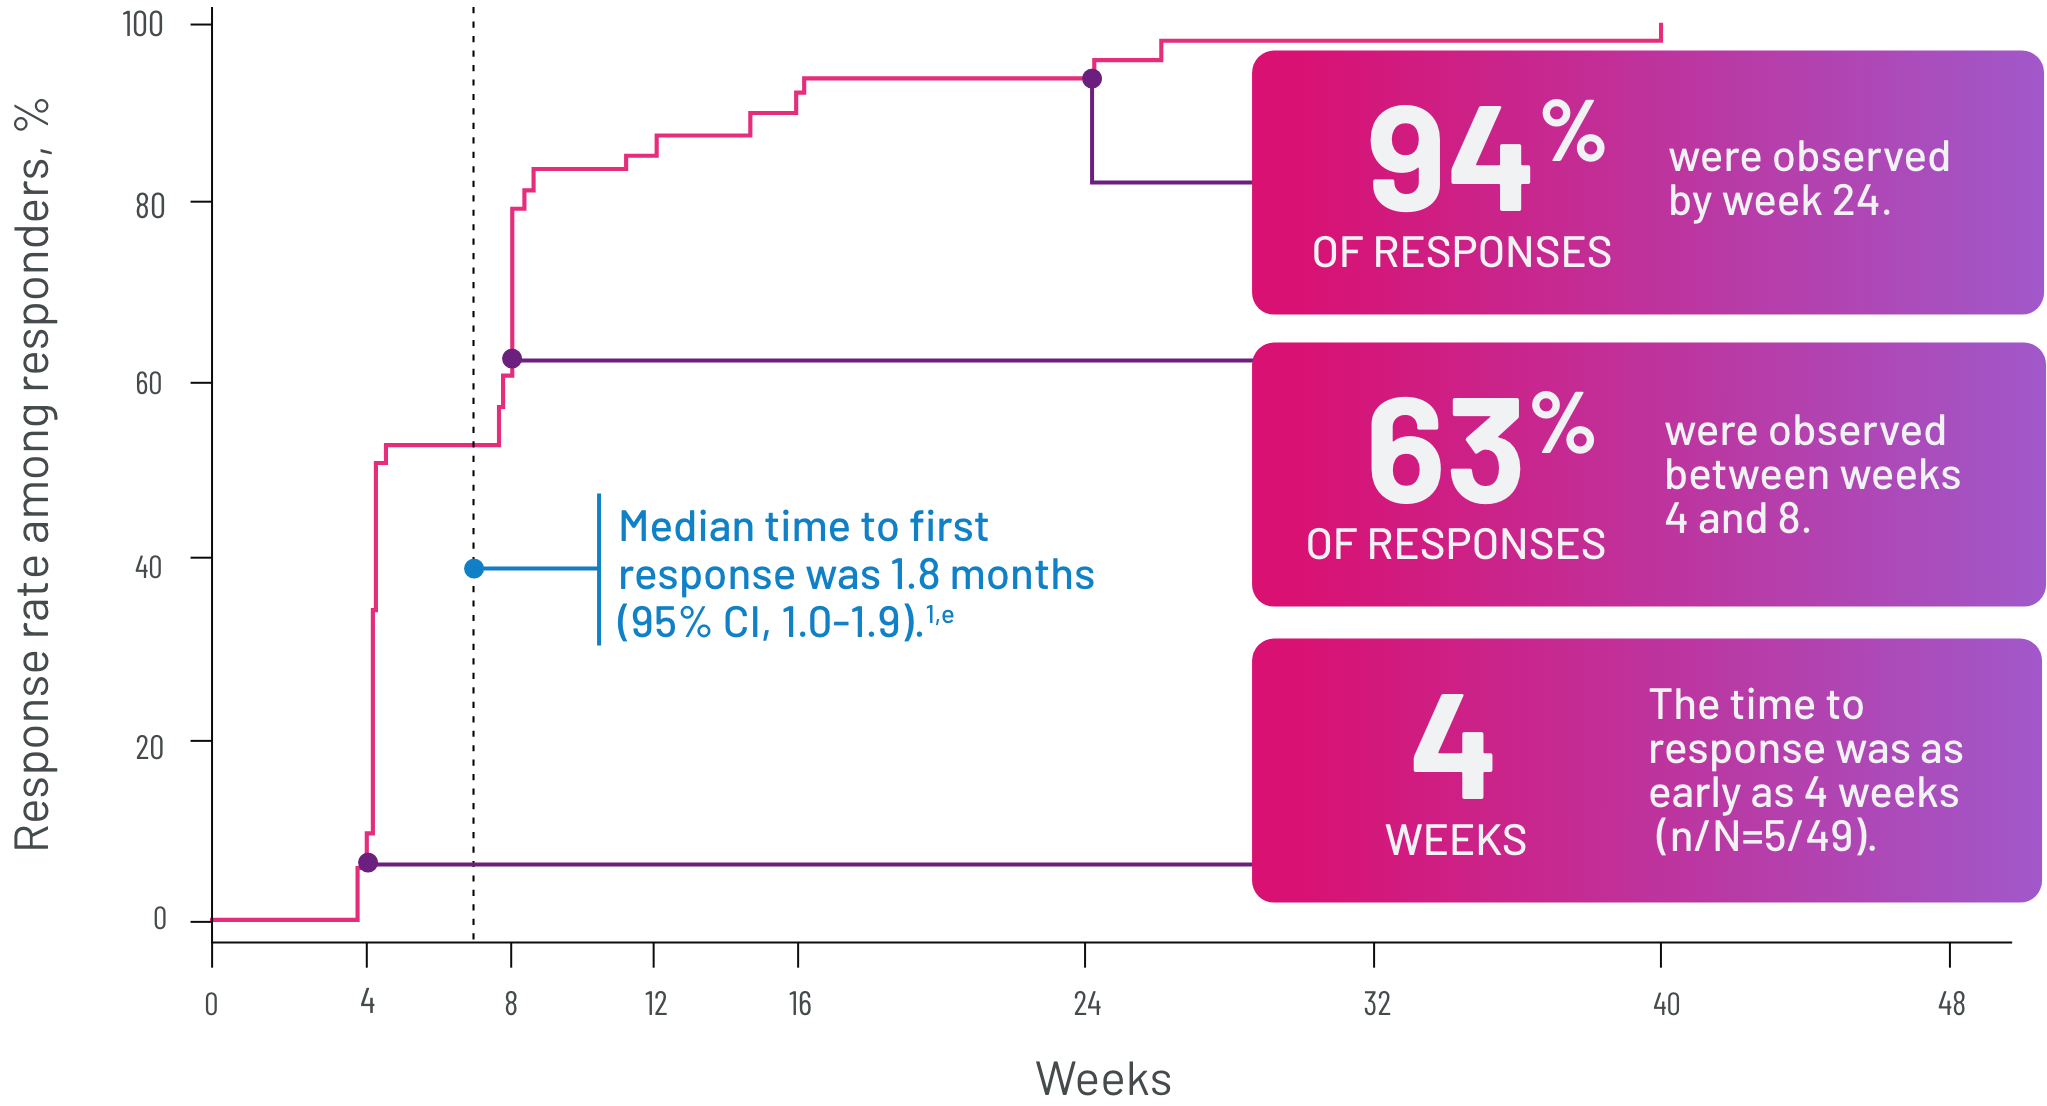 graphic showing the time to response was as early as 4 weeks, 63% of responses were observed between weeks 4 and 8, 94% of responses were observed by week 24, approximately 61% of responders demonstrated a sustained response for 20 or more weeks, and there was no death or new systemic therapy initiation in 62% (95% CI, 46-74) of the responder population at 12 months